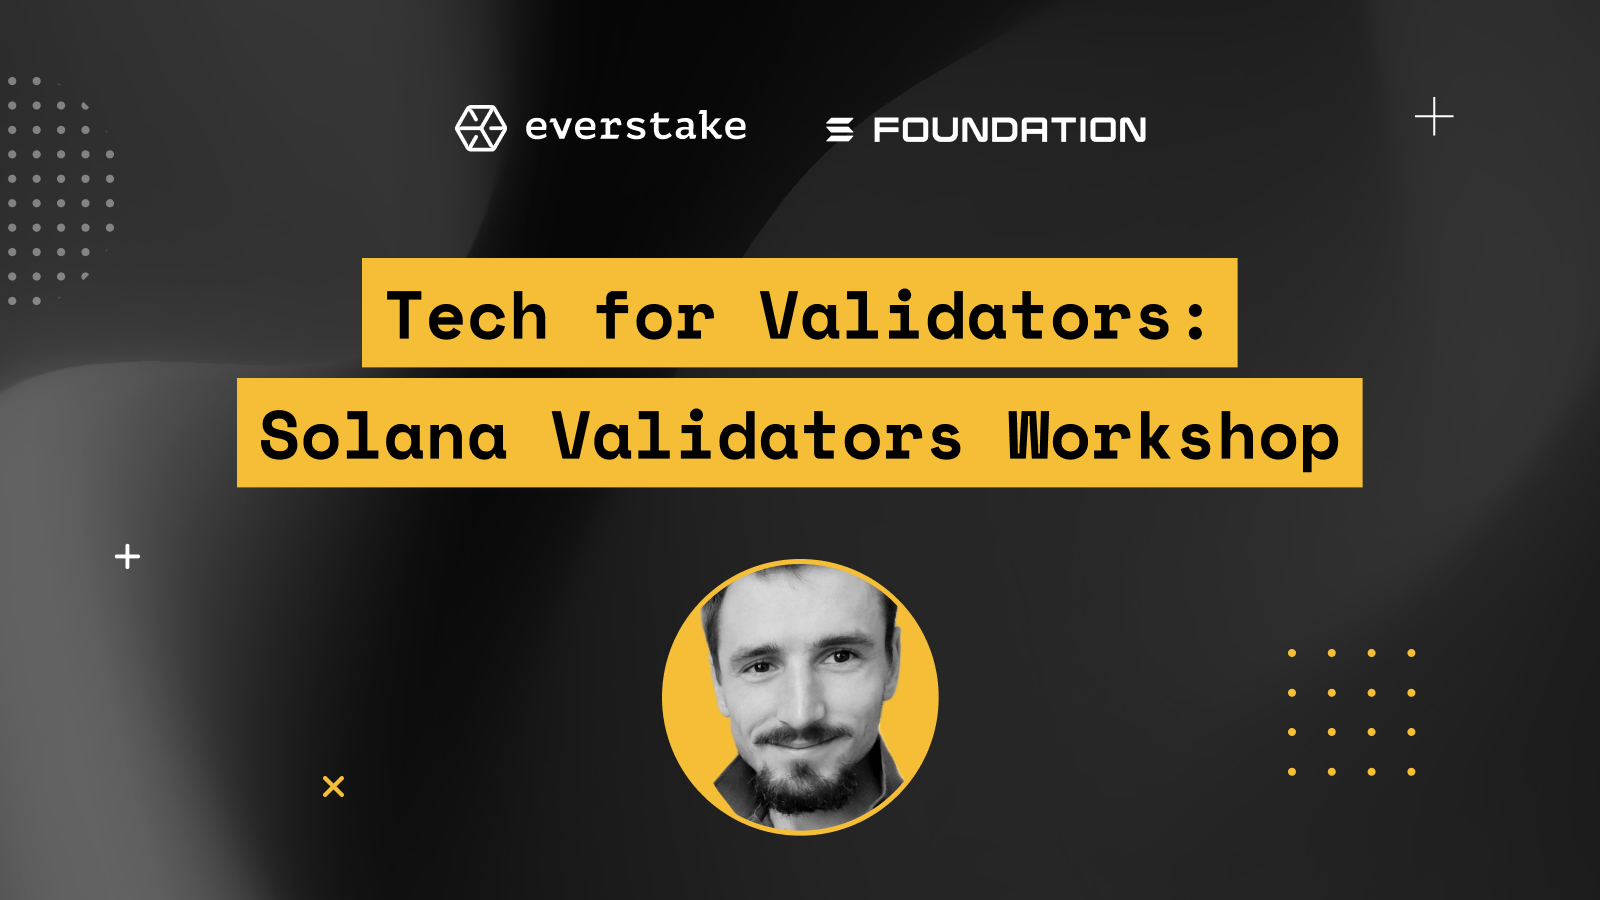 Do You Want to Become a Responsible Validator? Get Advice from Everstake DevOps